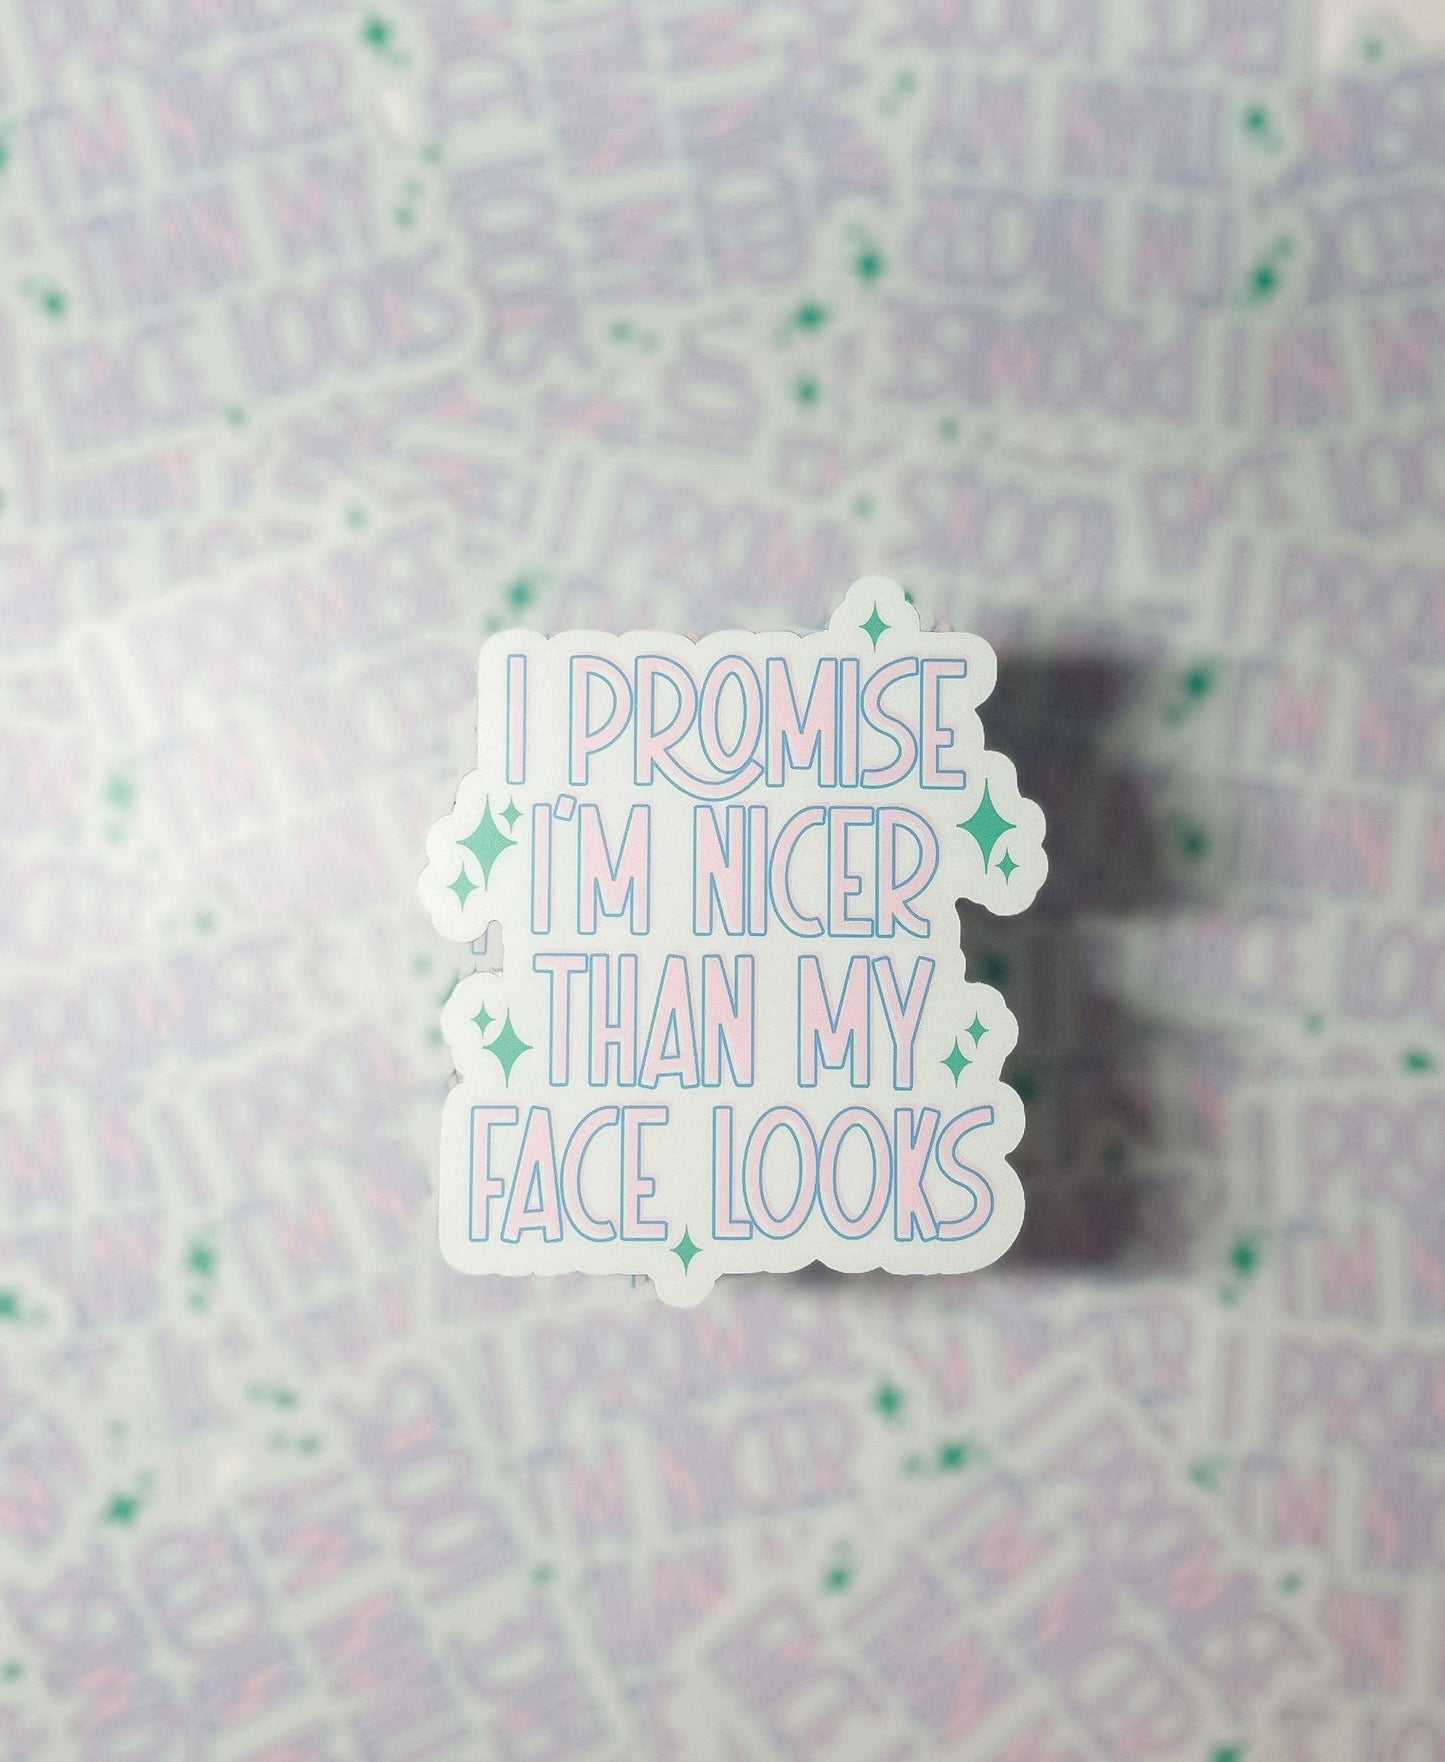 I Promise I'm Nicer Than my Face Looks Sticker - funny relatable stickers